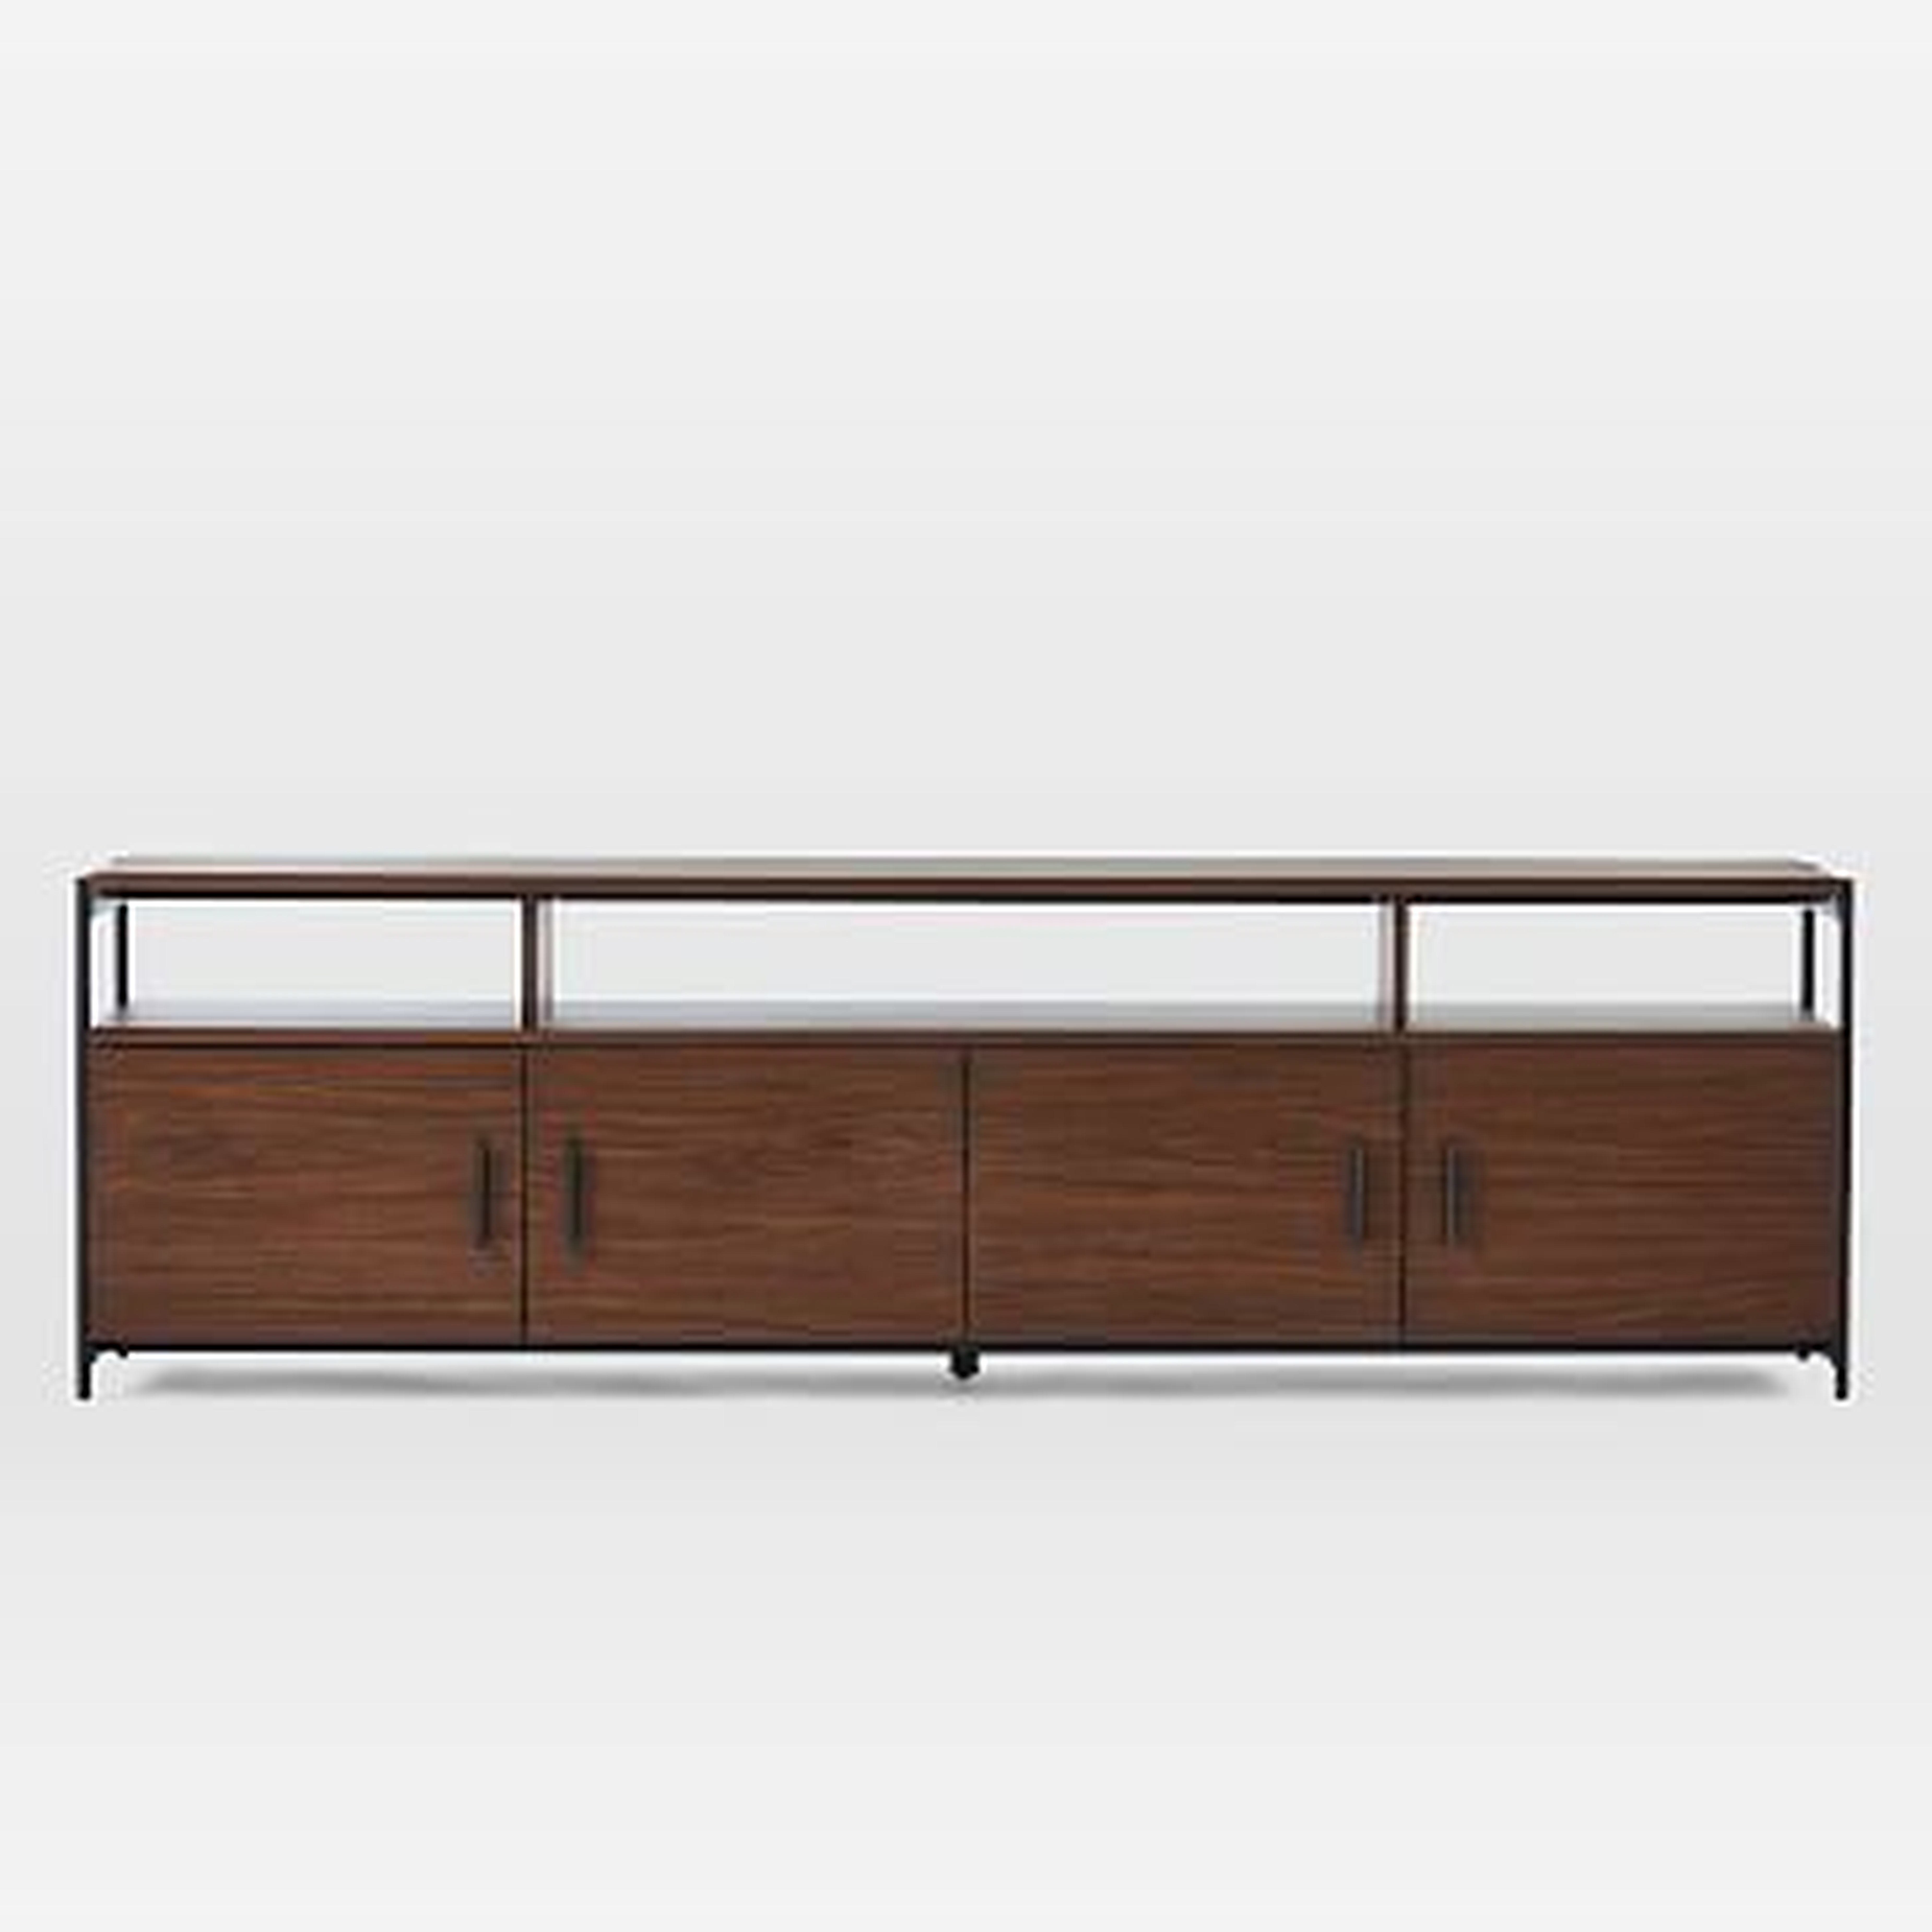 Foundry Media Console, 81.5" - West Elm